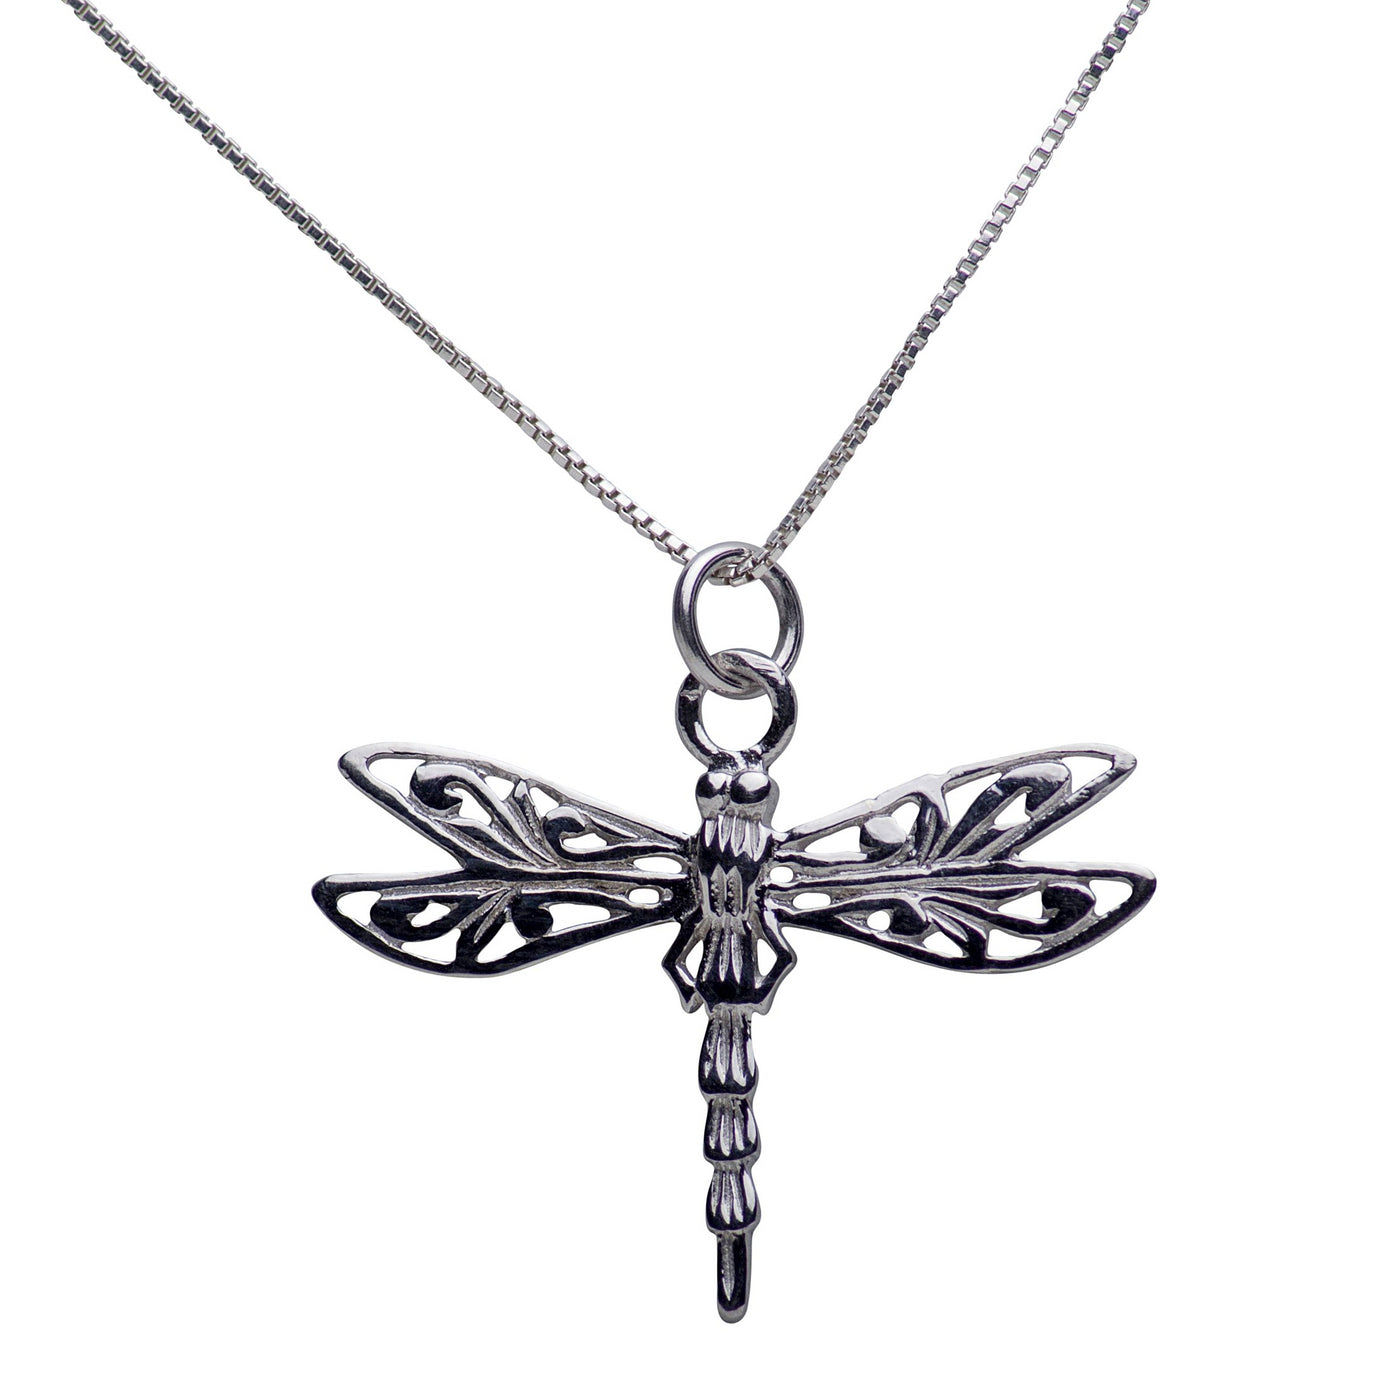 Delicate Dragonfly Rhodium Plated Sterling Silver Pendant Necklace